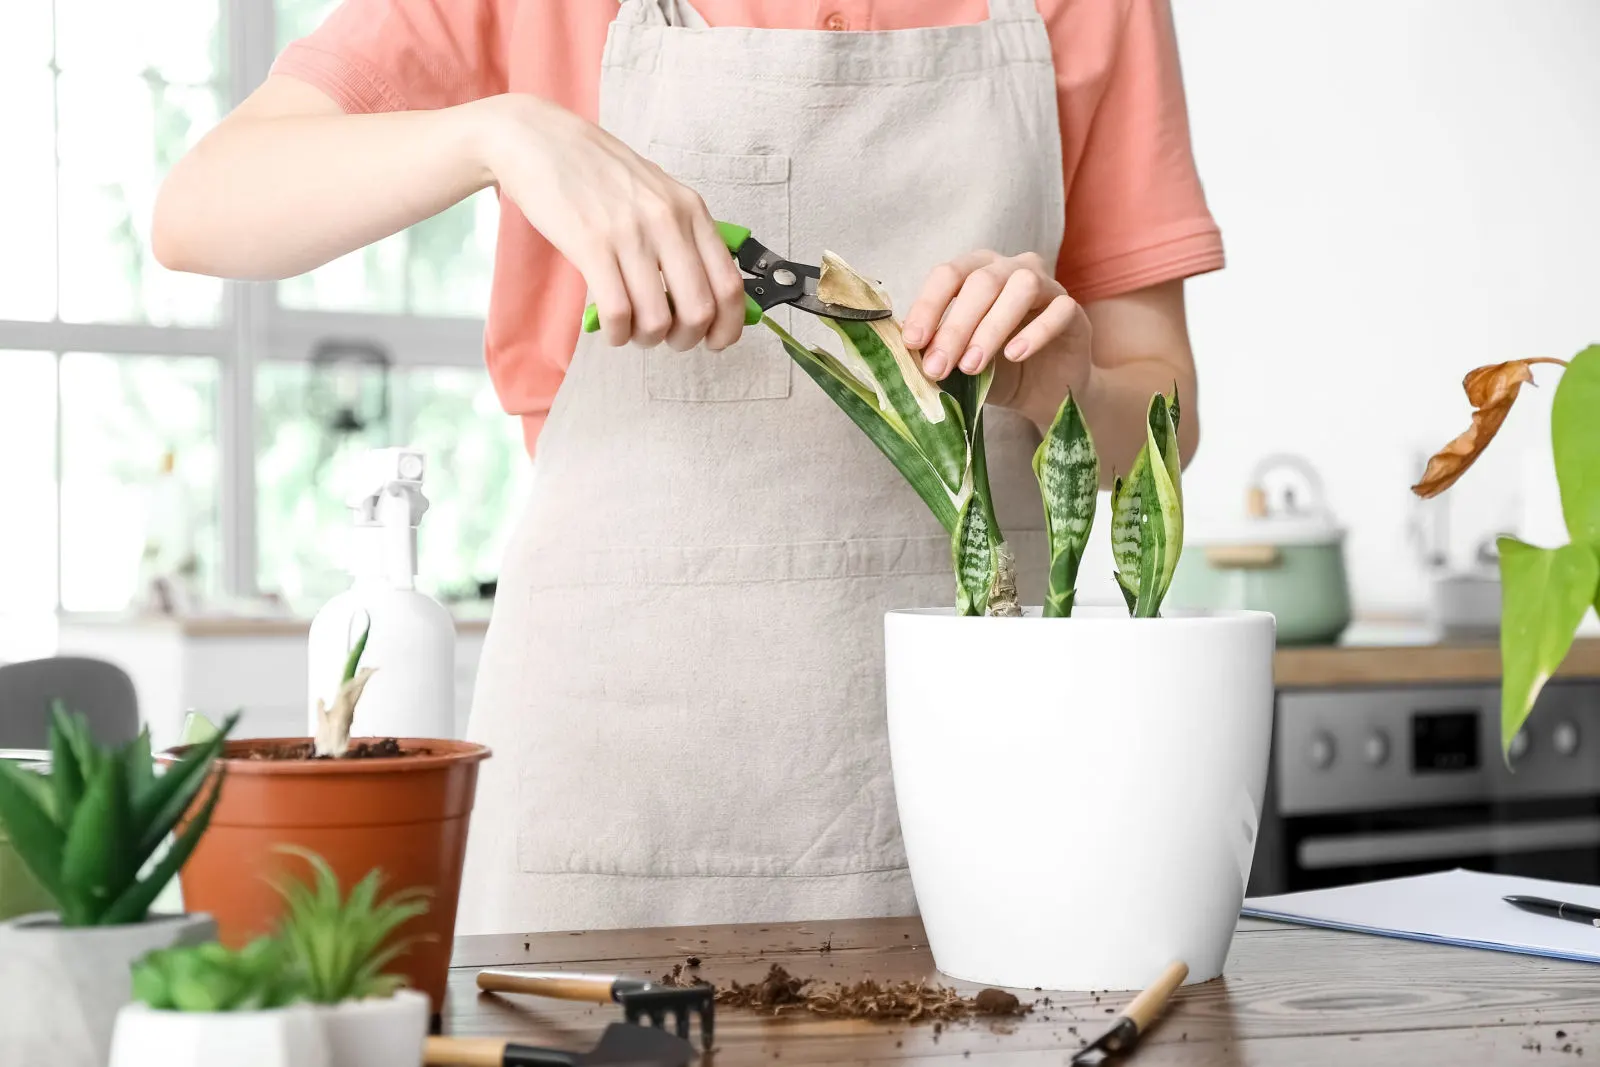 Pruning and Maintenance: Learn how to prune and maintain snake plant